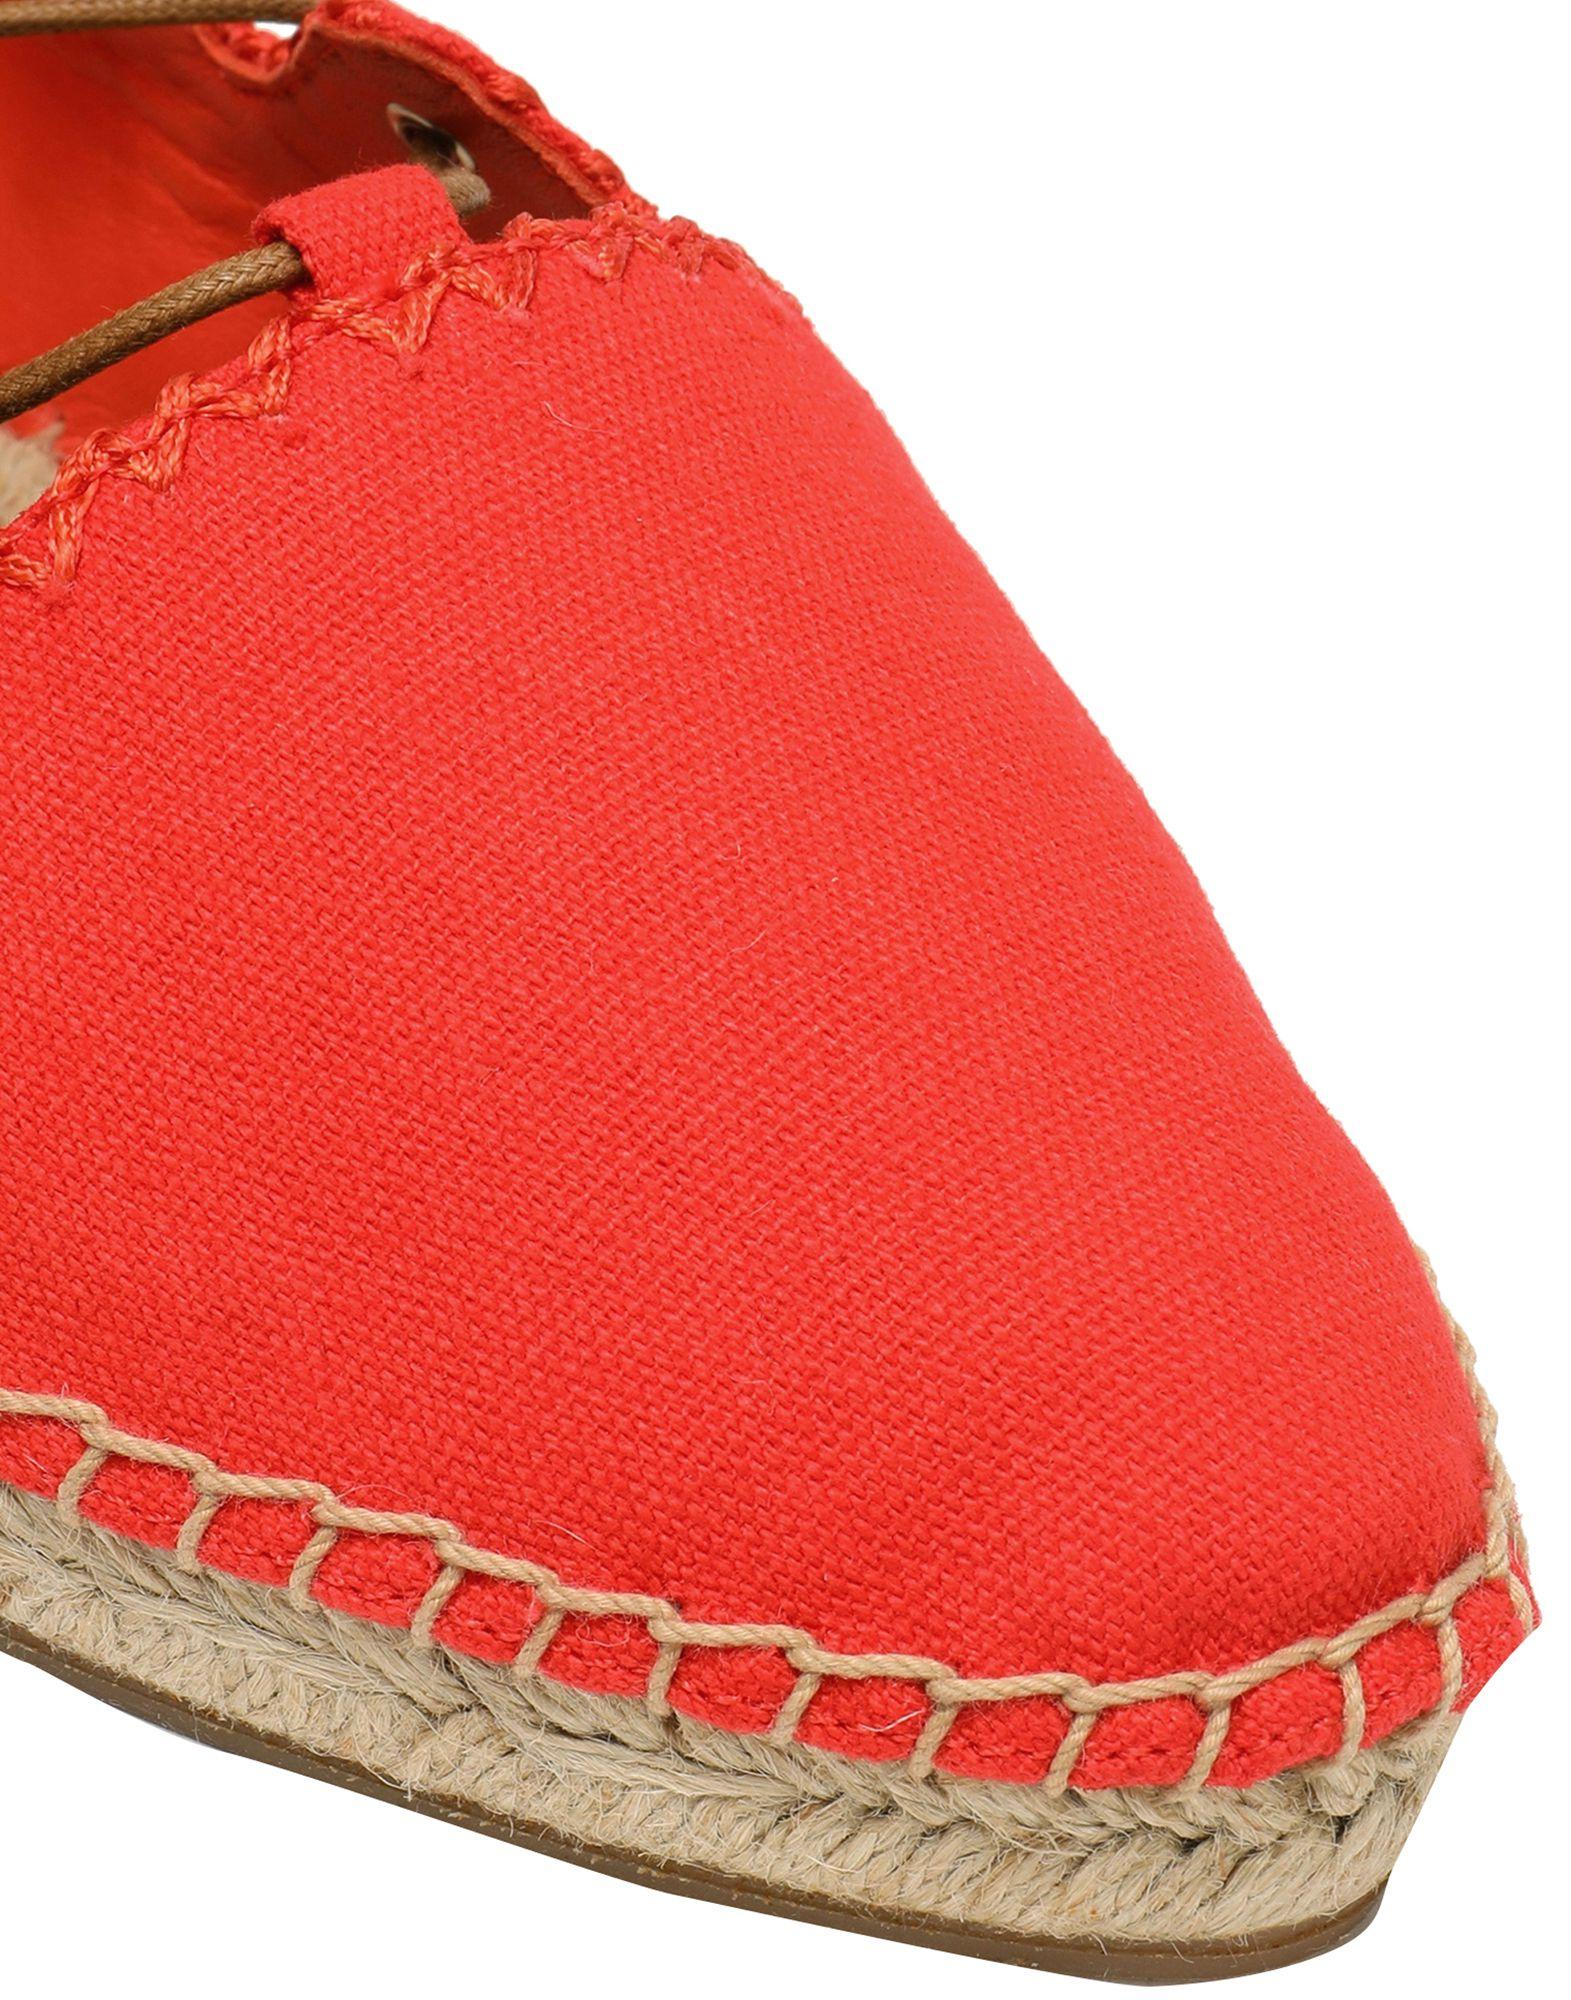 Tory Burch Canvas Espadrilles in Red - Lyst